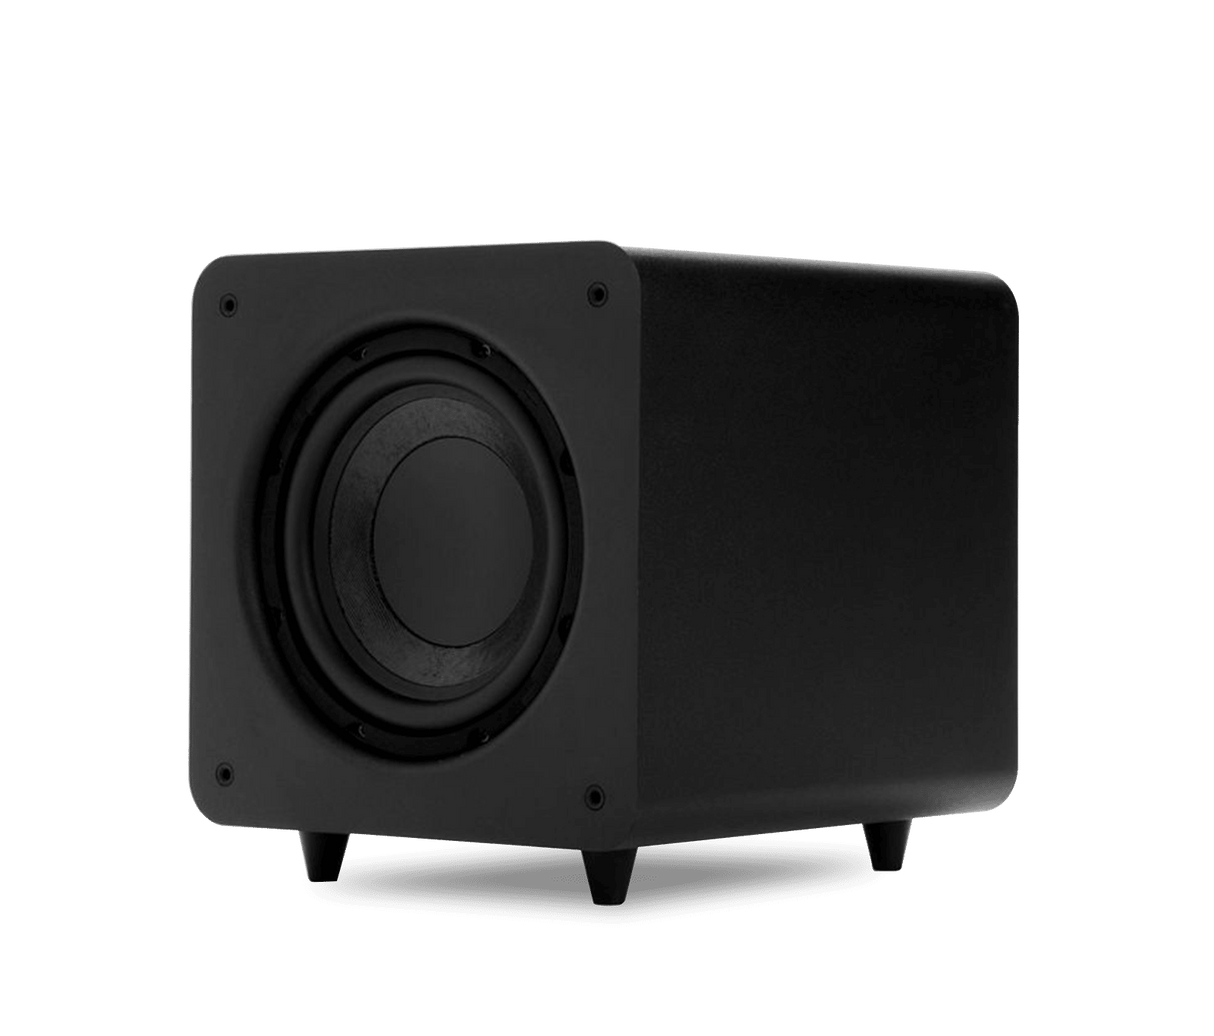 PSW111 Powered 8” Subwoofer